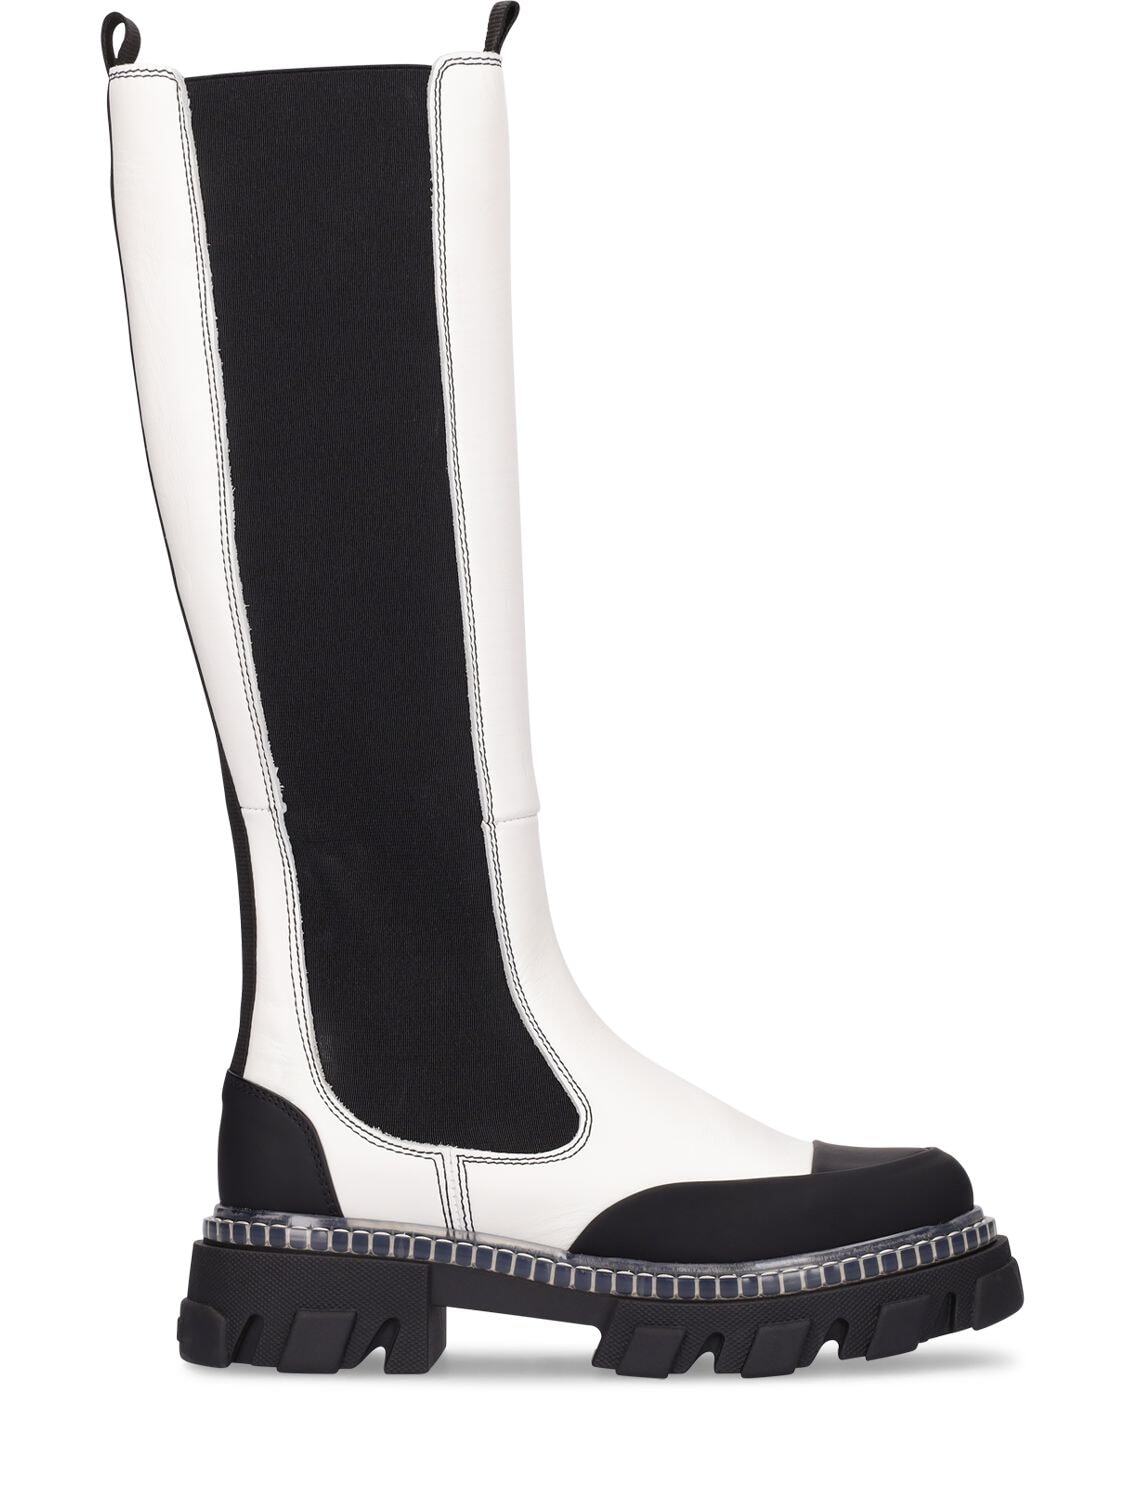 GANNI 50mm Leather Tall Boots in black / white